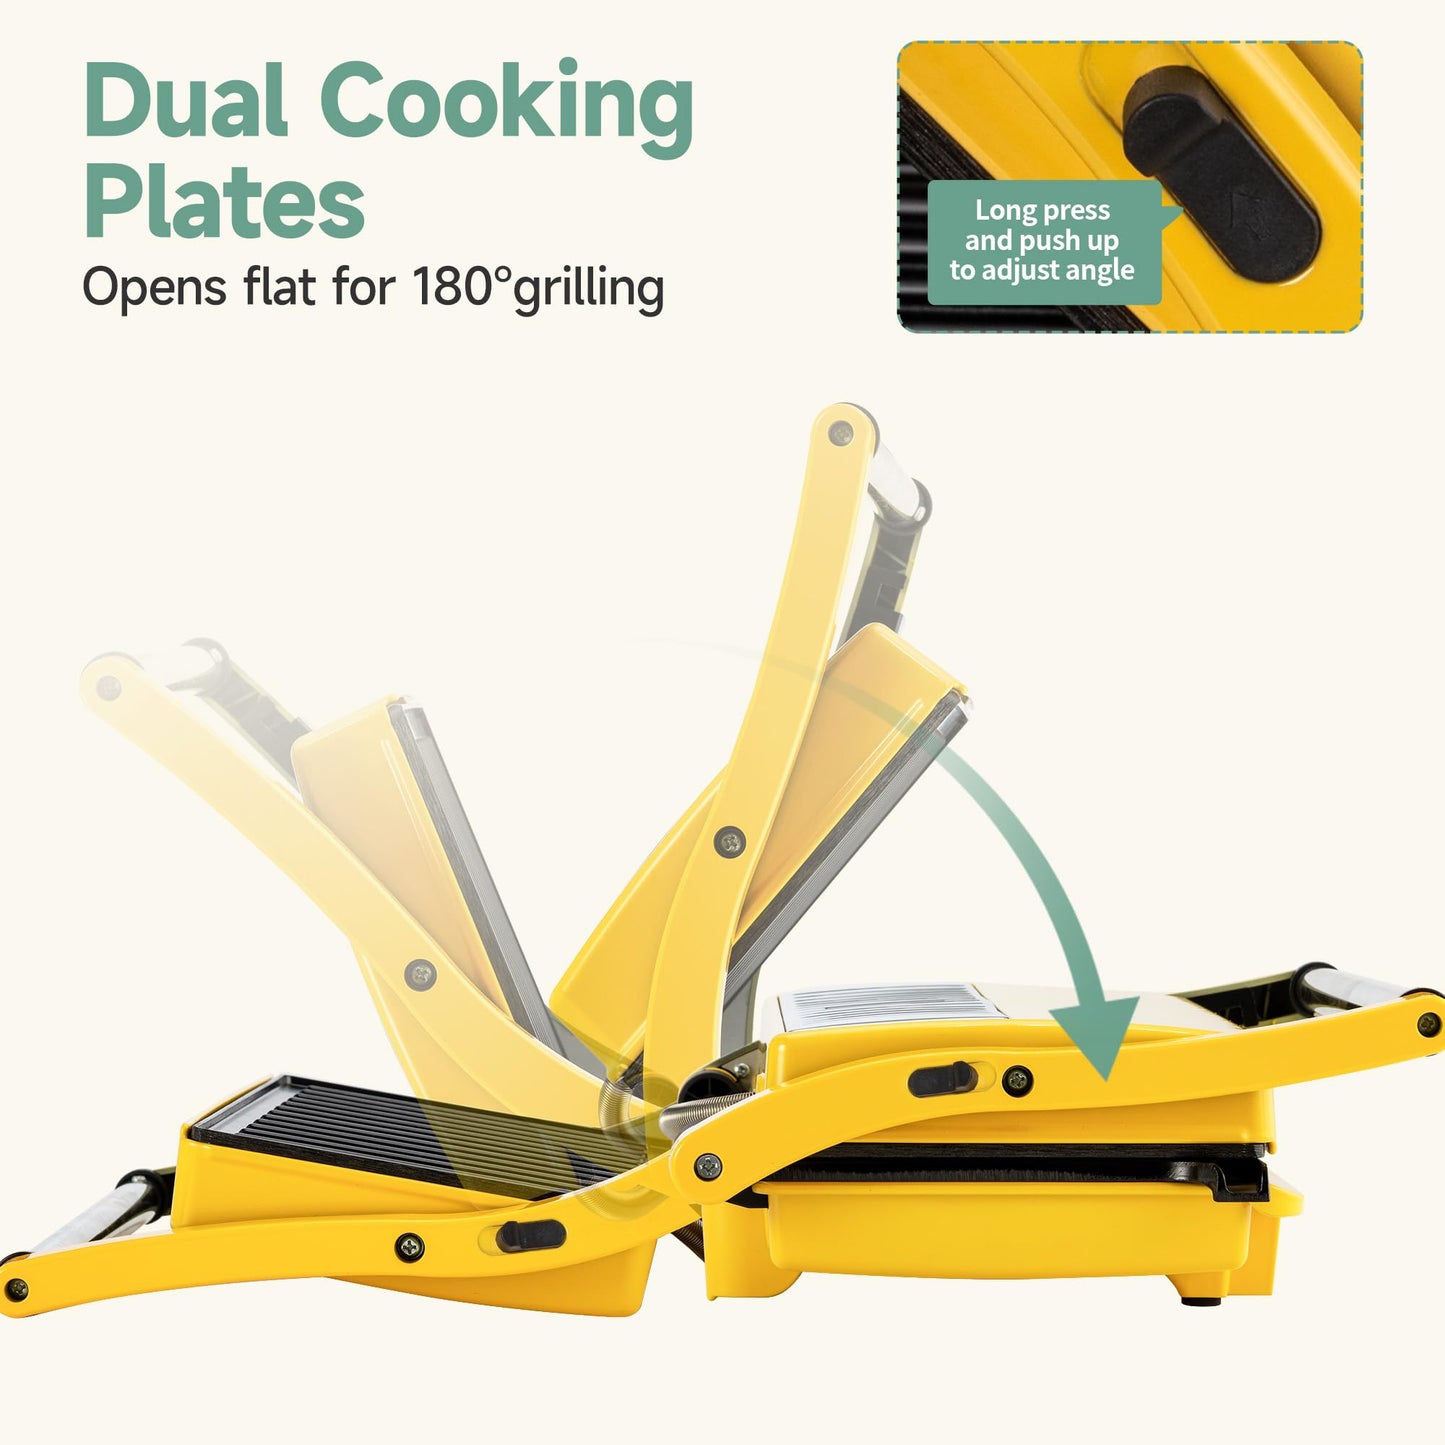 SUSTEAS 3-in-1 Electric Indoor Grill (Yellow)- Panini Press with Non-Stick Cooking Plates